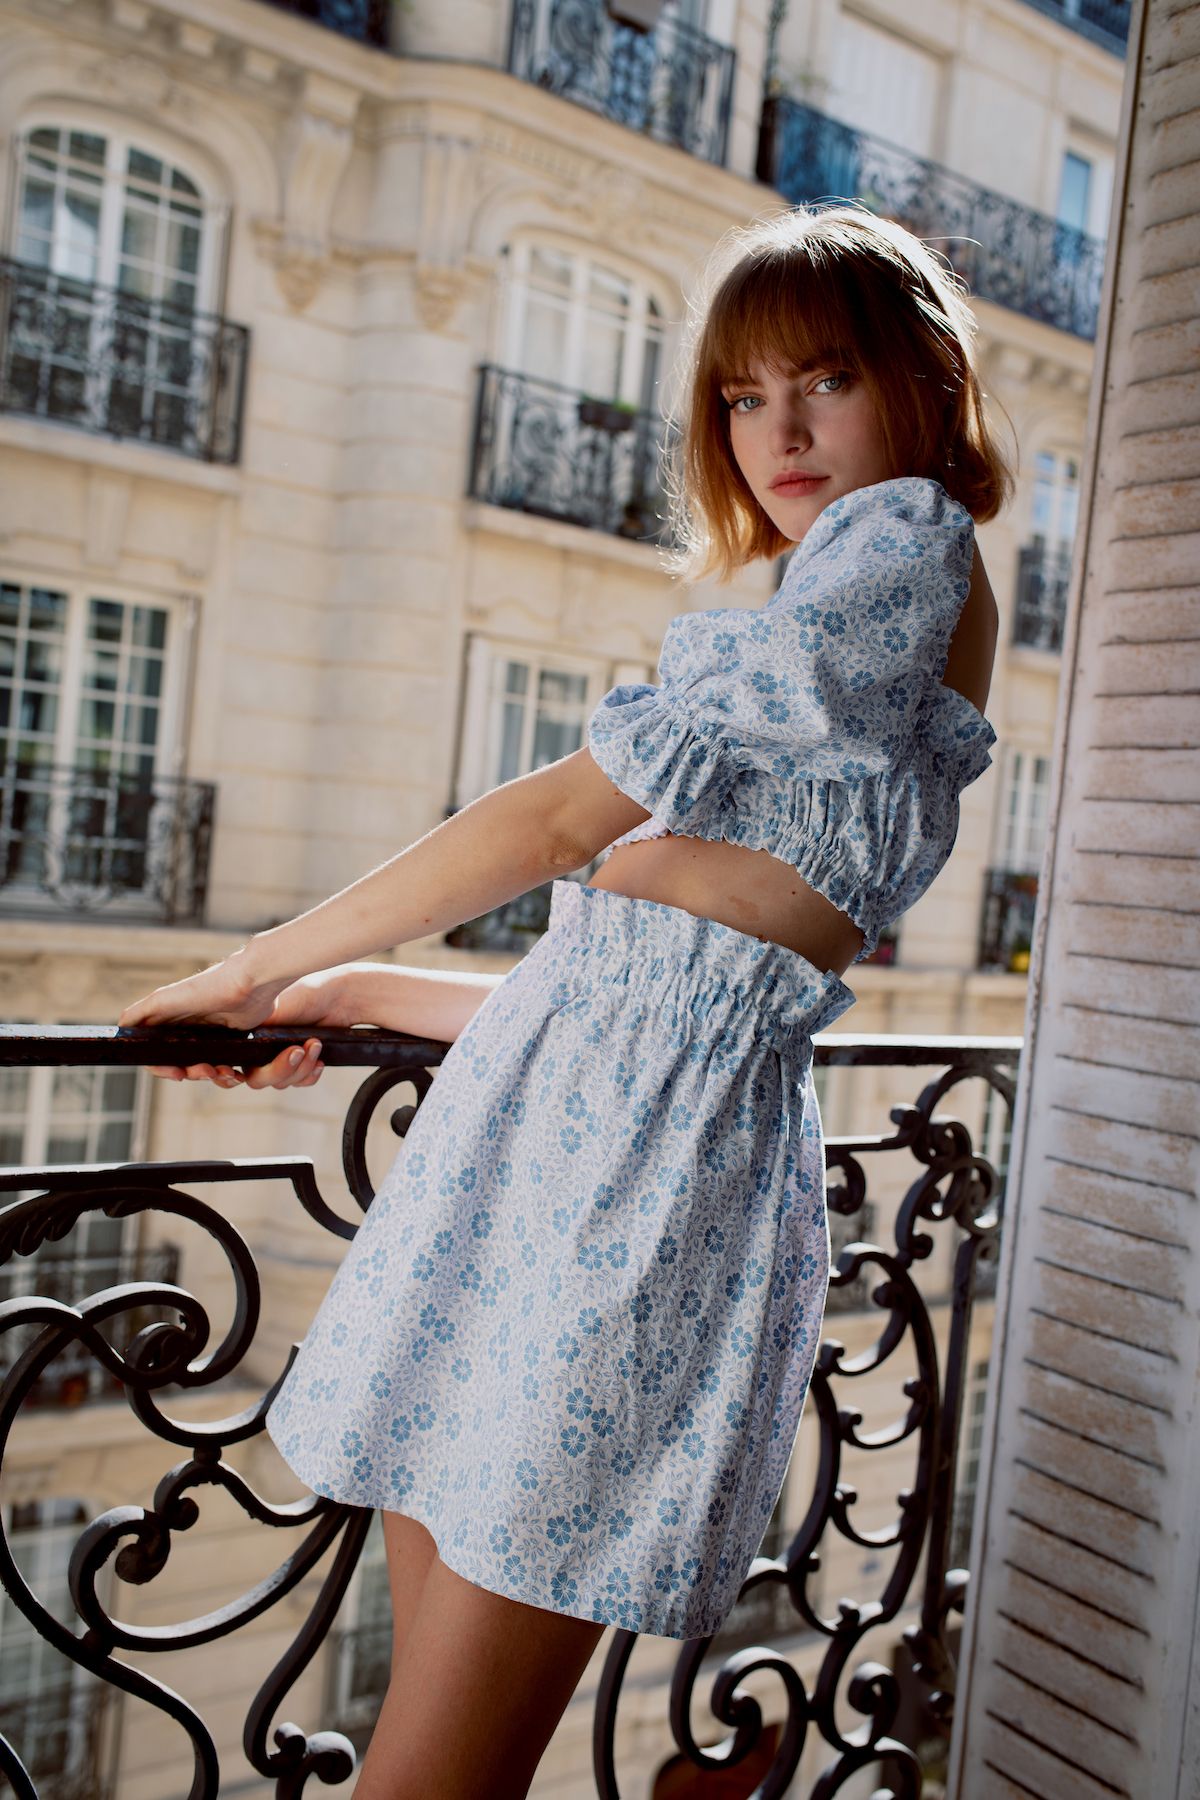 Camée Léone Ensemble Shot in Paris by Elodie Sáiz featuring Lise with Make-up by Mathilde Moncamp